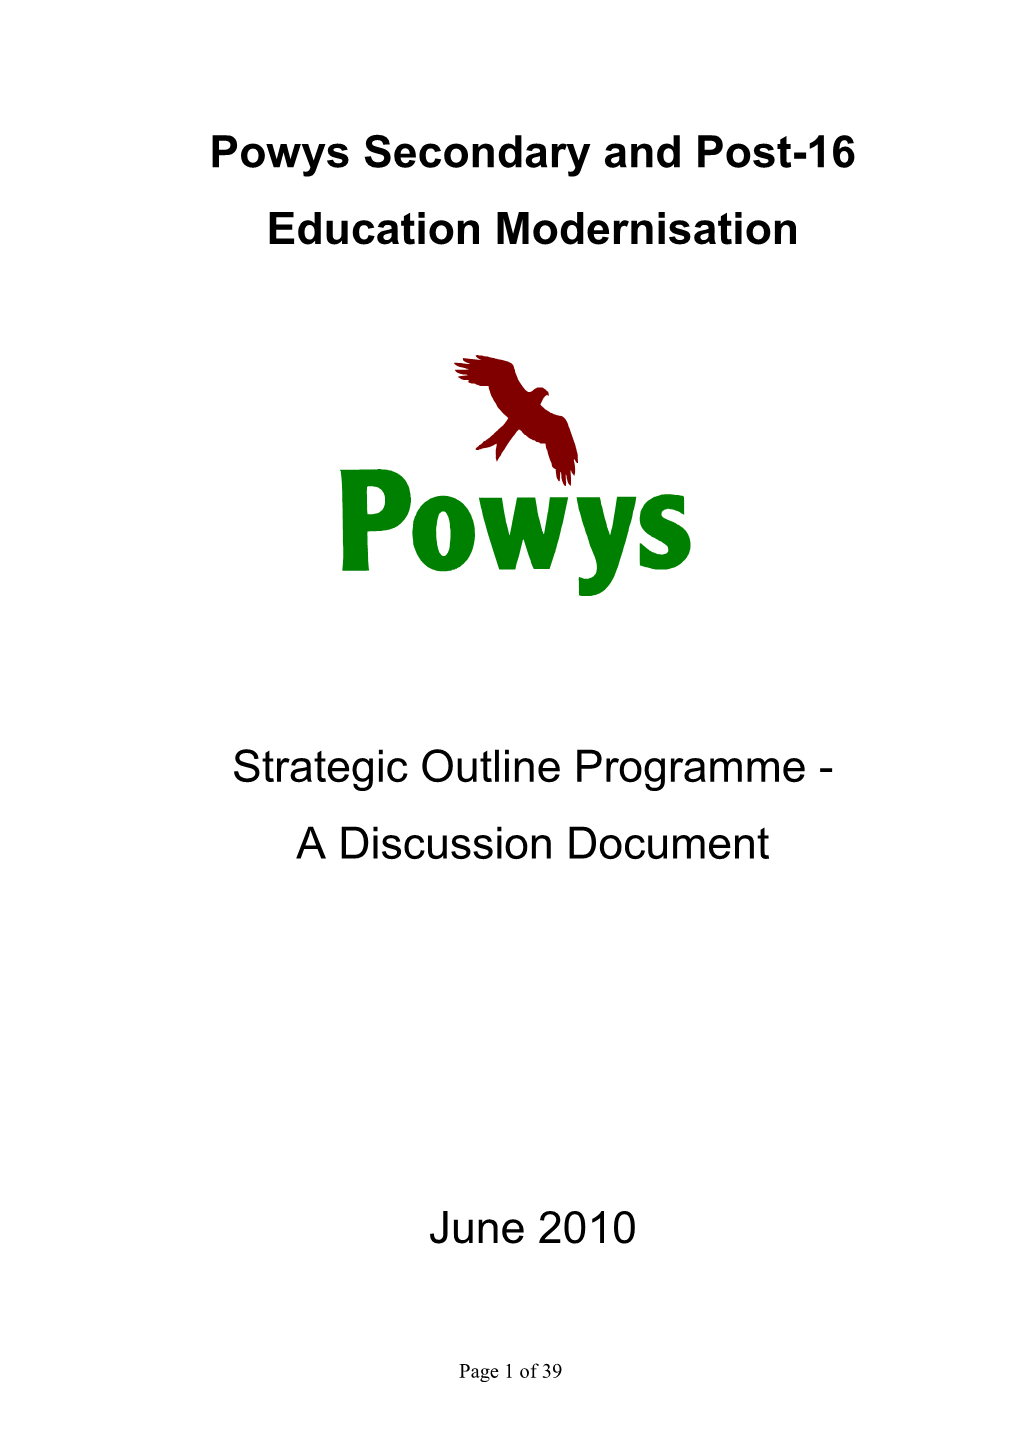 Powys Secondary and Post-16 Education Modernisation